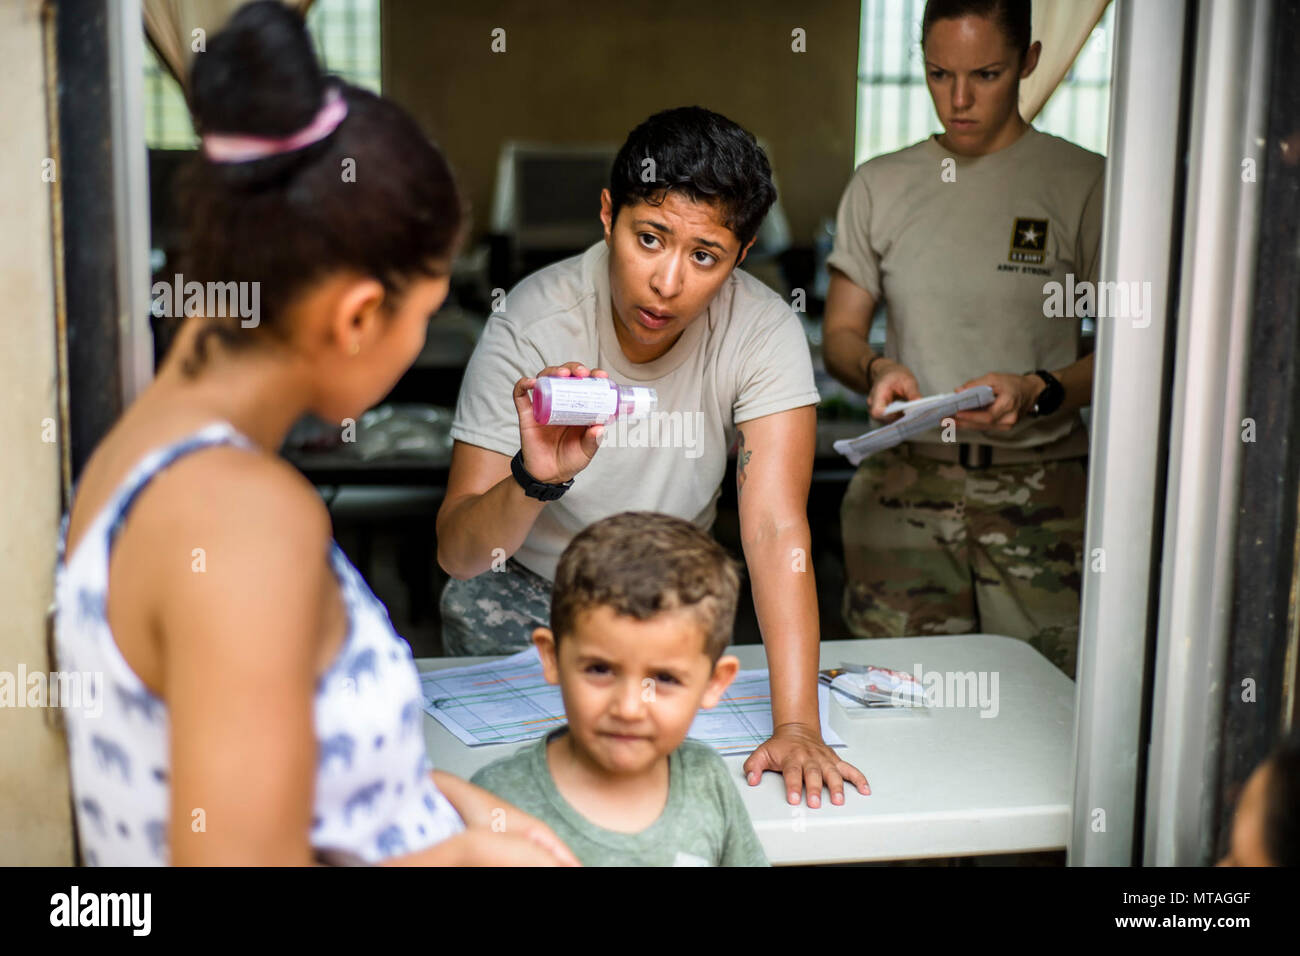 U.S. Army SGT. Carla Linares explains the medicine dosage to a Honduran patient at a Medical Readiness Training Exercise site at Cooperativa village, Colon, Honduras , Apr. 20, 2017. Joint Task Force – Bravo Medical Element, provided care to more than 850 patients during a Medical Readiness Training Exercise in Cooperativa village, Colon, Honduras, Apr. 20-21, 2017. MEDEL also supported a Military Partnership Engagement and assisted more than 650 patients with the Hondurian Navy in Santa Rosa de Aguan, Colon, Honduras, Apr. 22, 2017. Stock Photo